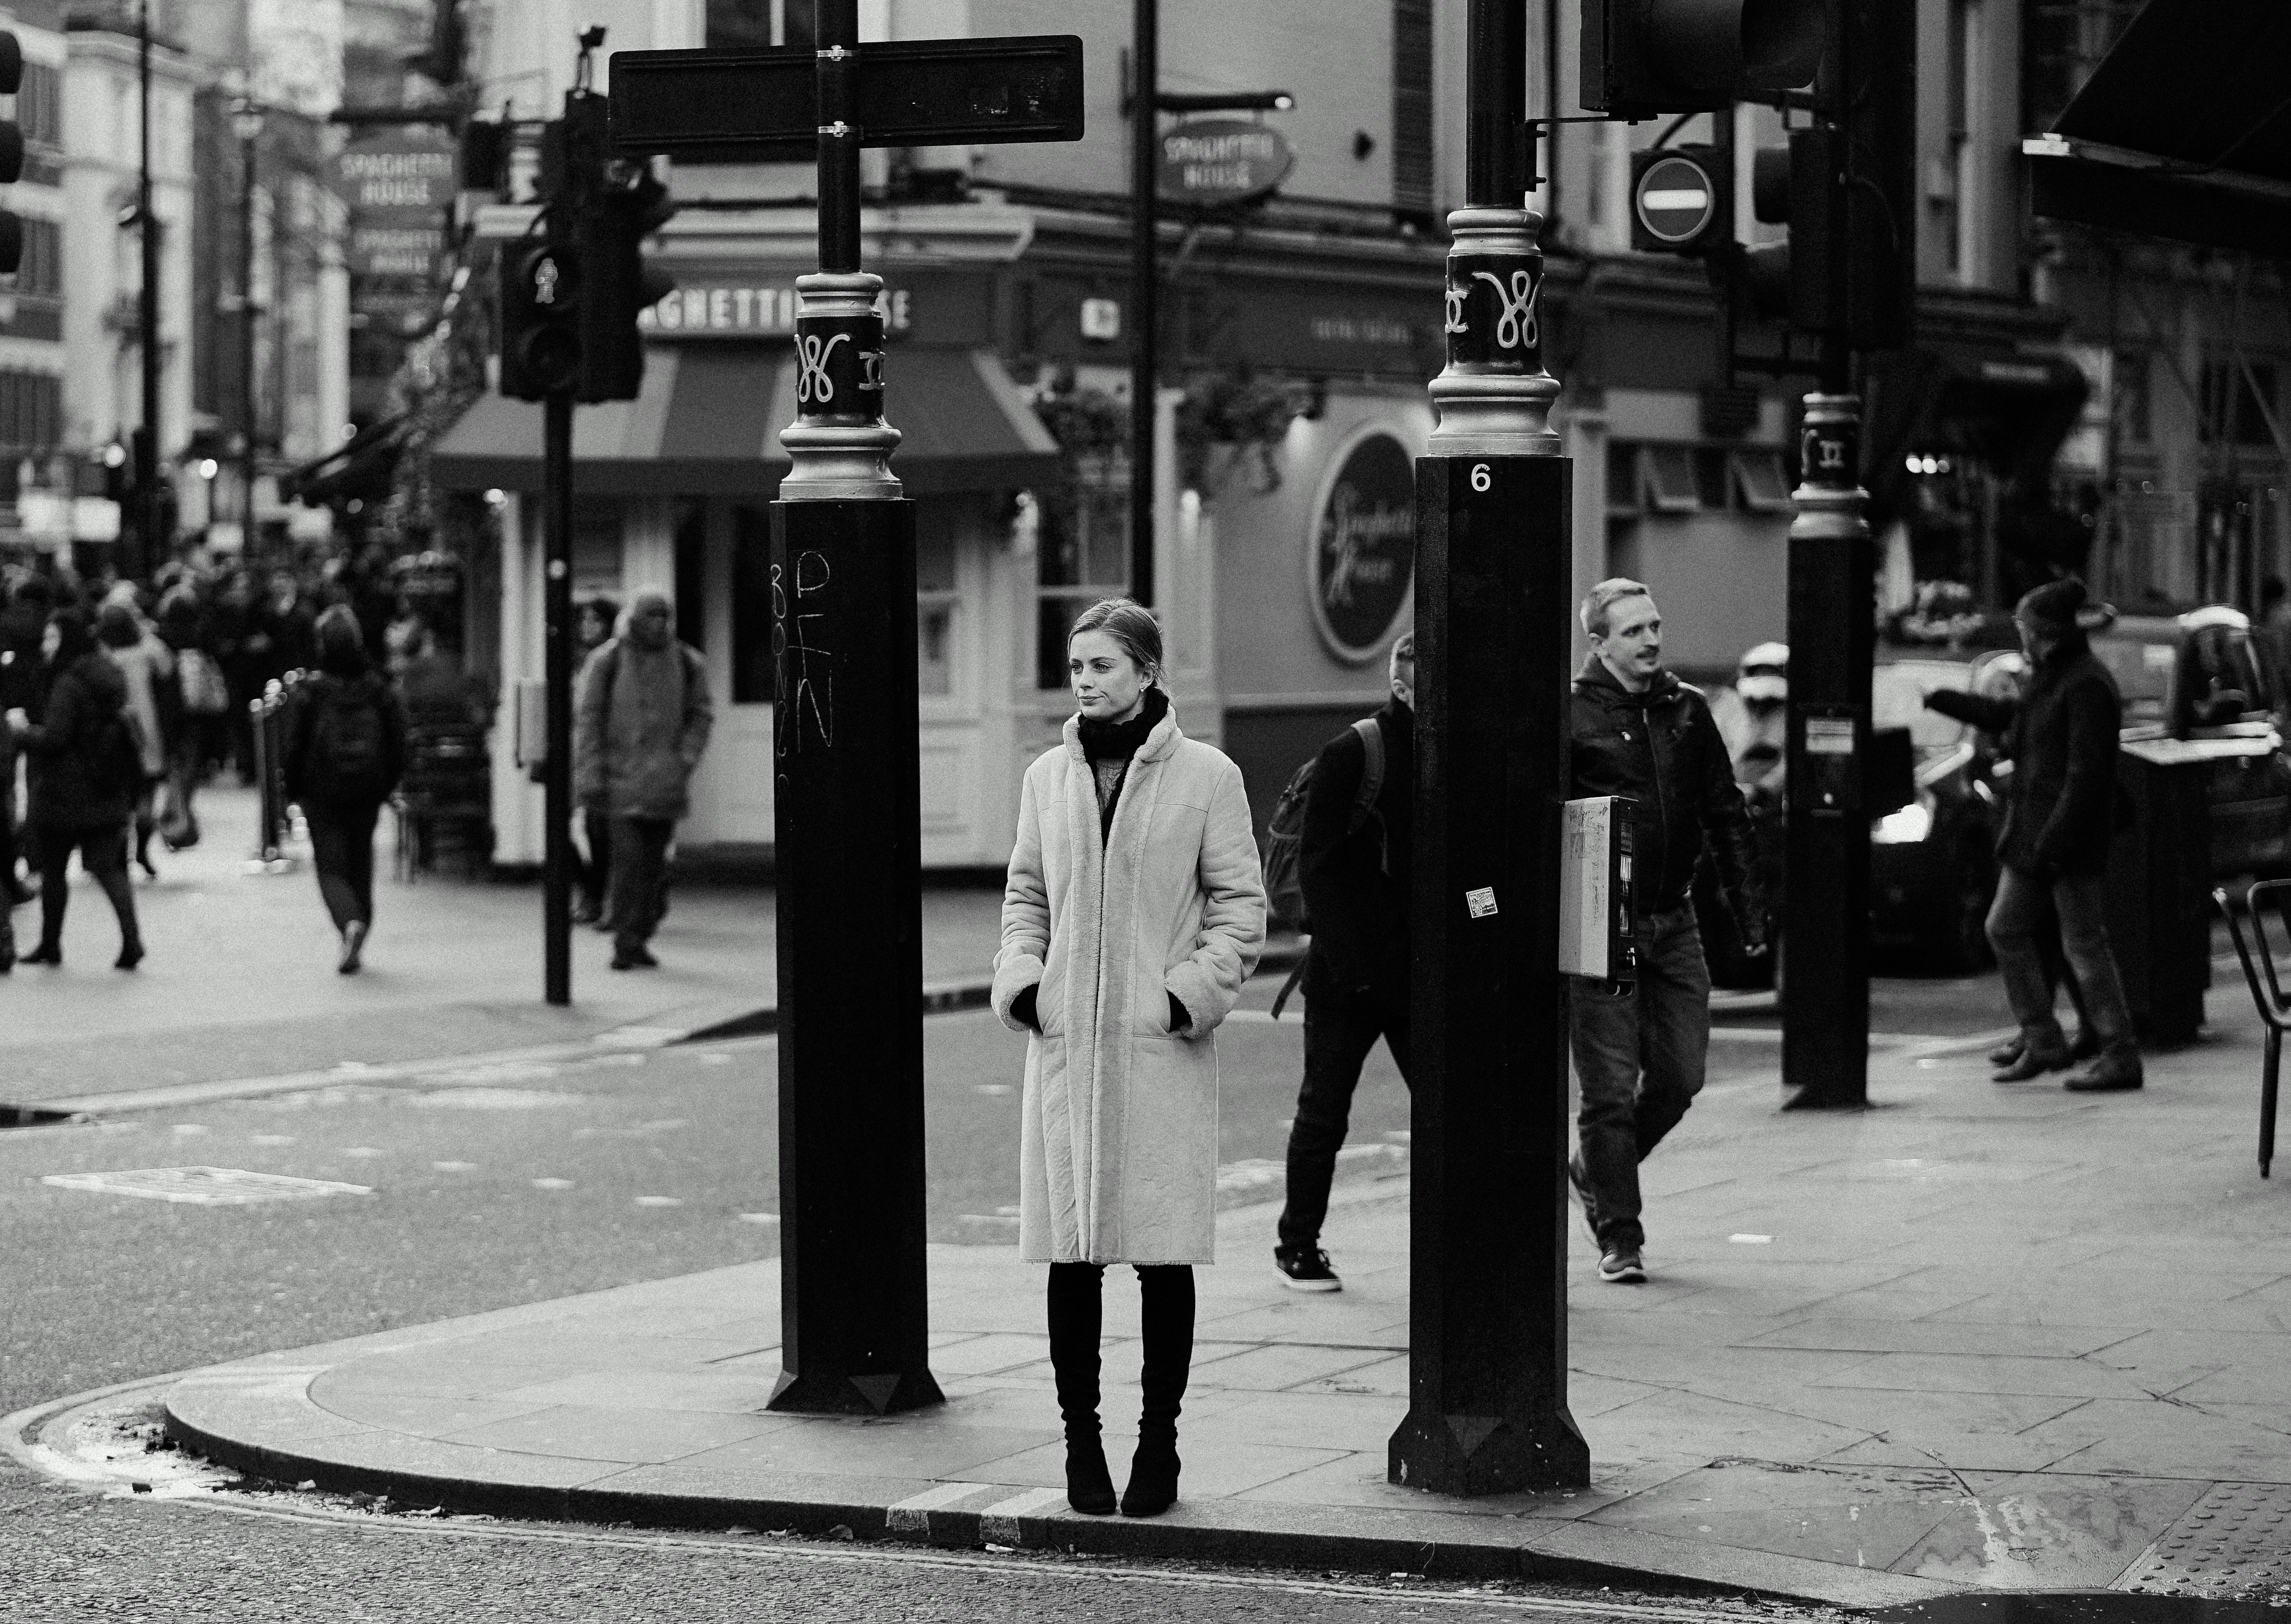 grayscale photography of people walking on street during daytime